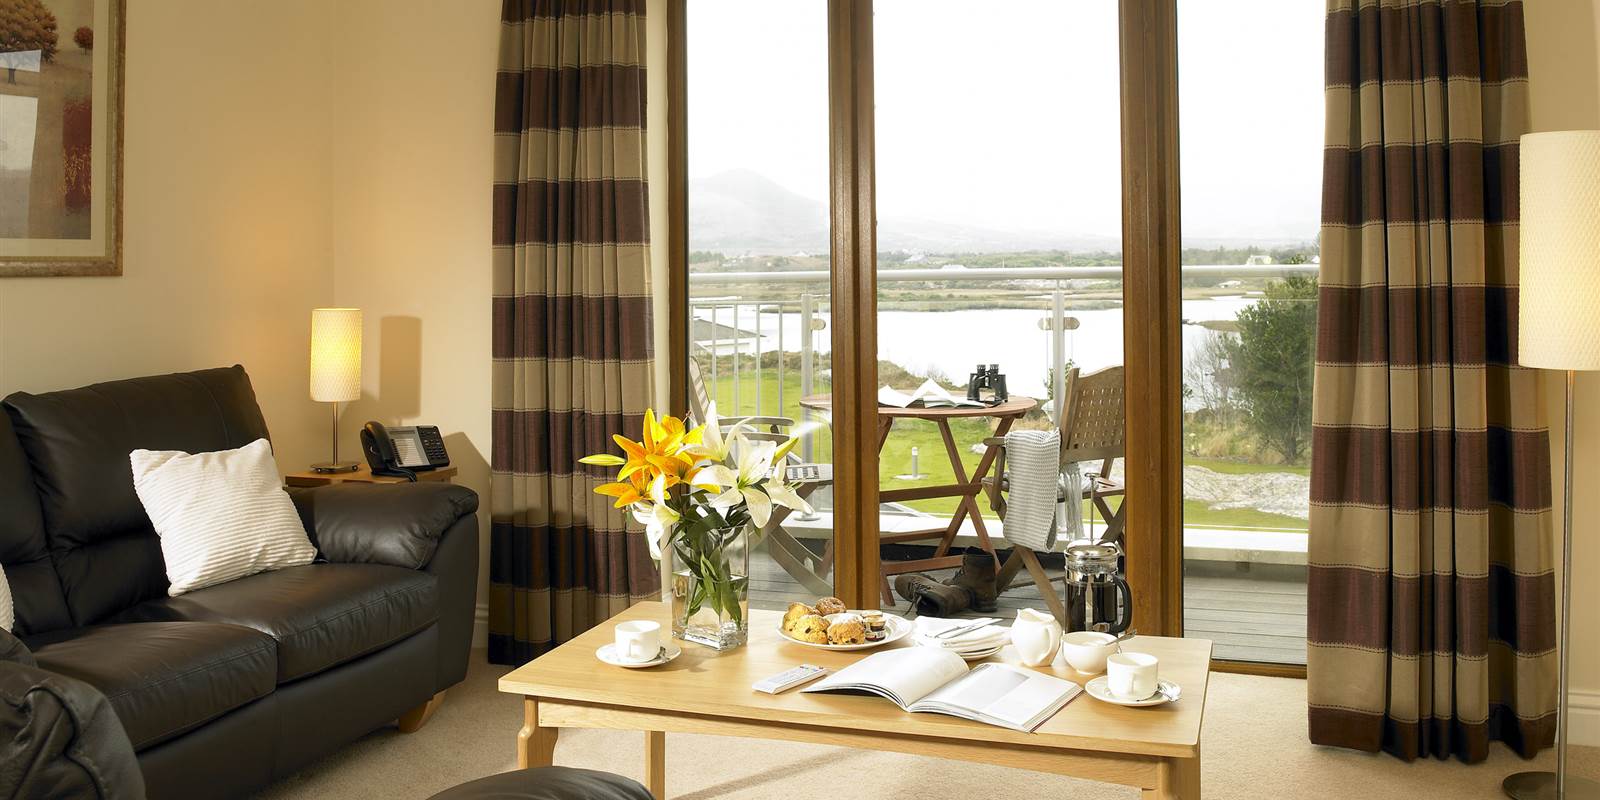 Sneem Hotel in Kerry with Luxury Apartments. 𝟮 𝗡𝗶𝗴𝗵𝘁 𝗦𝘁𝗮𝘆 𝗶𝗻 𝗮 𝟮 𝗯𝗲𝗱𝗿𝗼𝗼𝗺 𝗔𝗽𝗮𝗿𝘁 𝗙𝗿𝗼𝗺 €𝟮𝟱𝟬